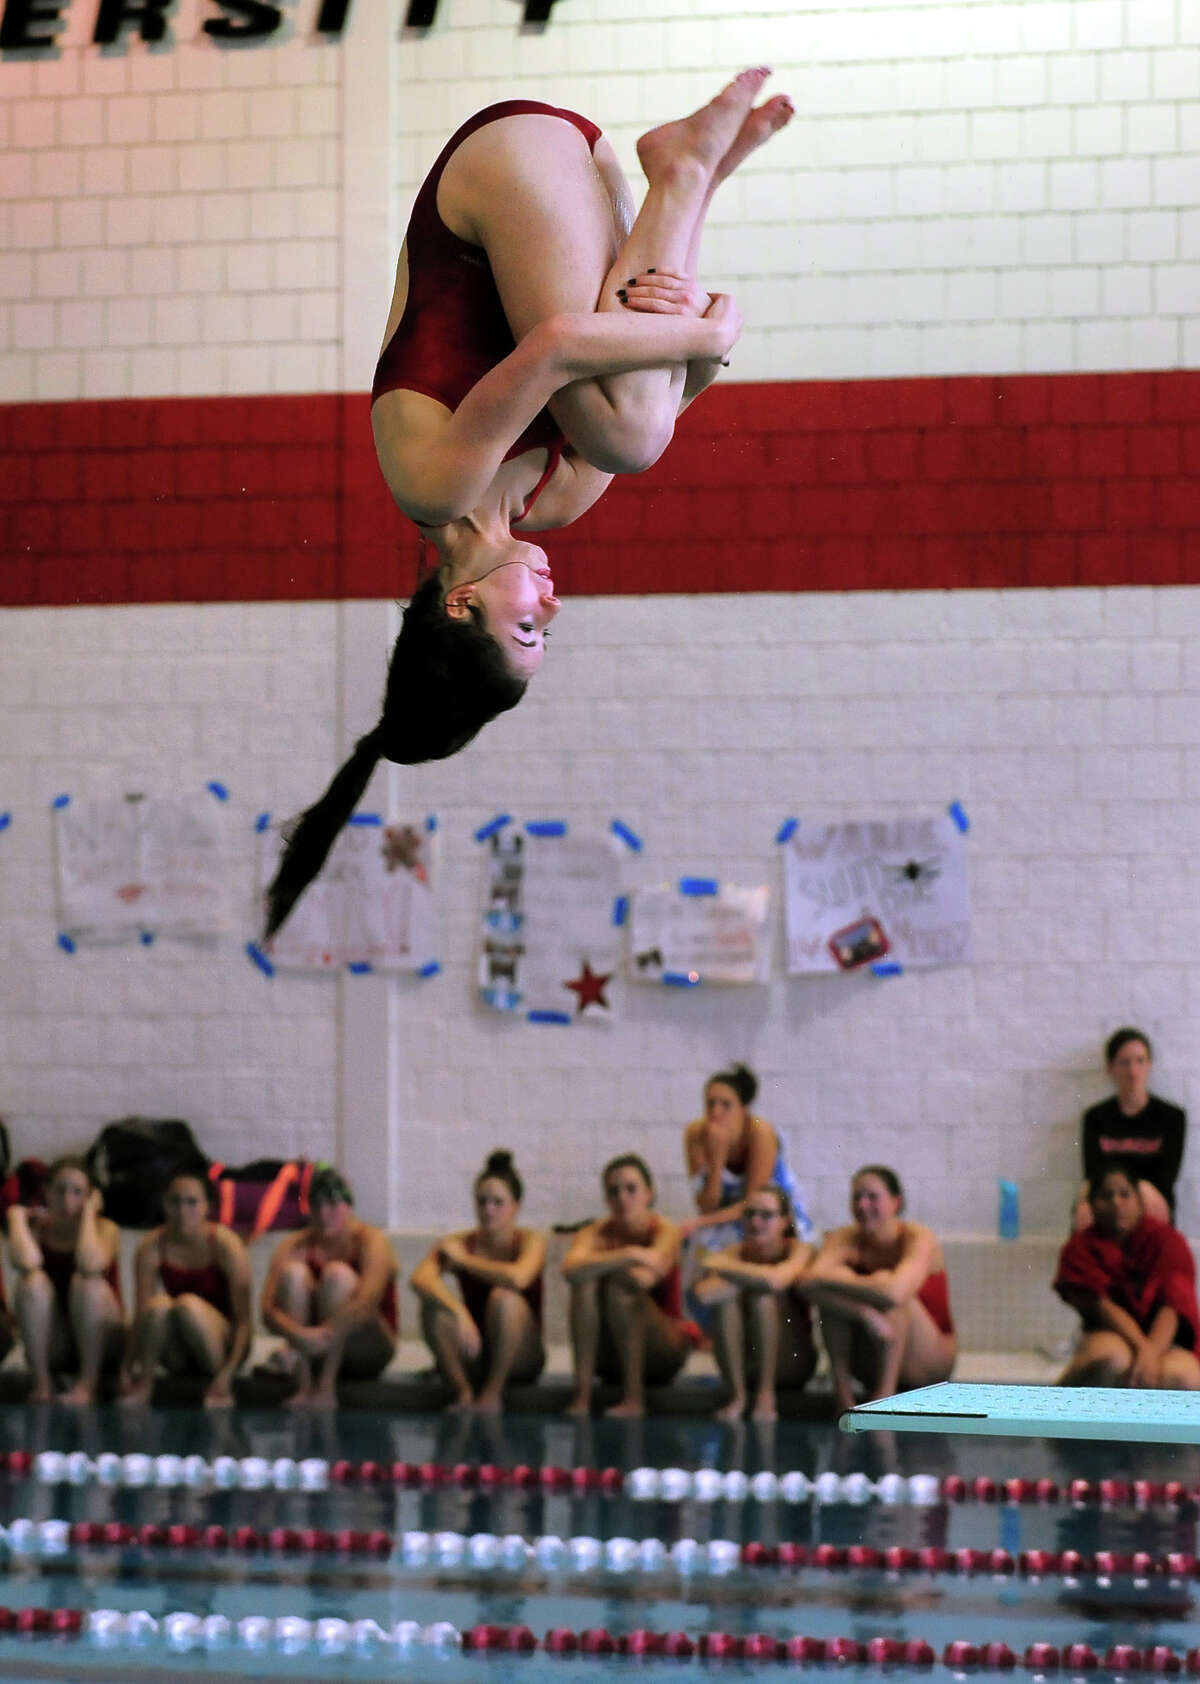 Fairfield Warde's Tess Shinbaum does a flip as she dives, during swim meet action against Fairfield Ludlowe at Fairfield University in Fairfield, Conn. on Wednesday October 8, 2014.